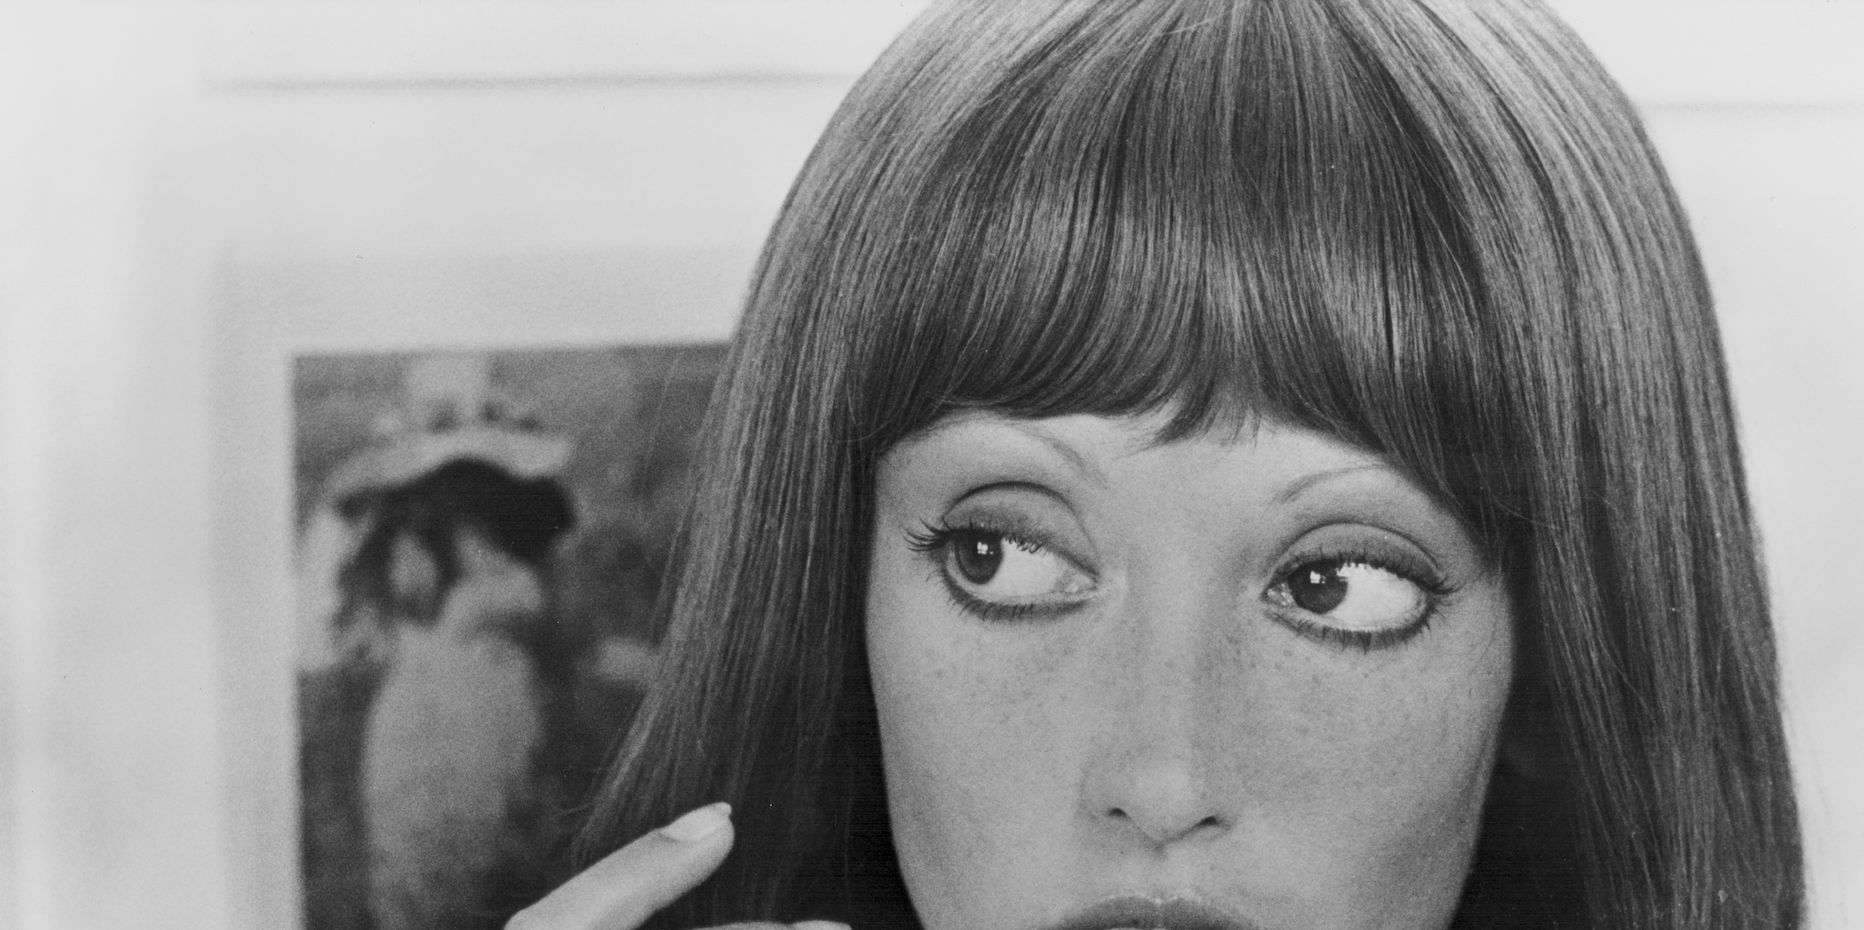 actress shelley duvall in a scene from the movie '3 women', 1977 photo by stanley bielecki movie collectiongetty images